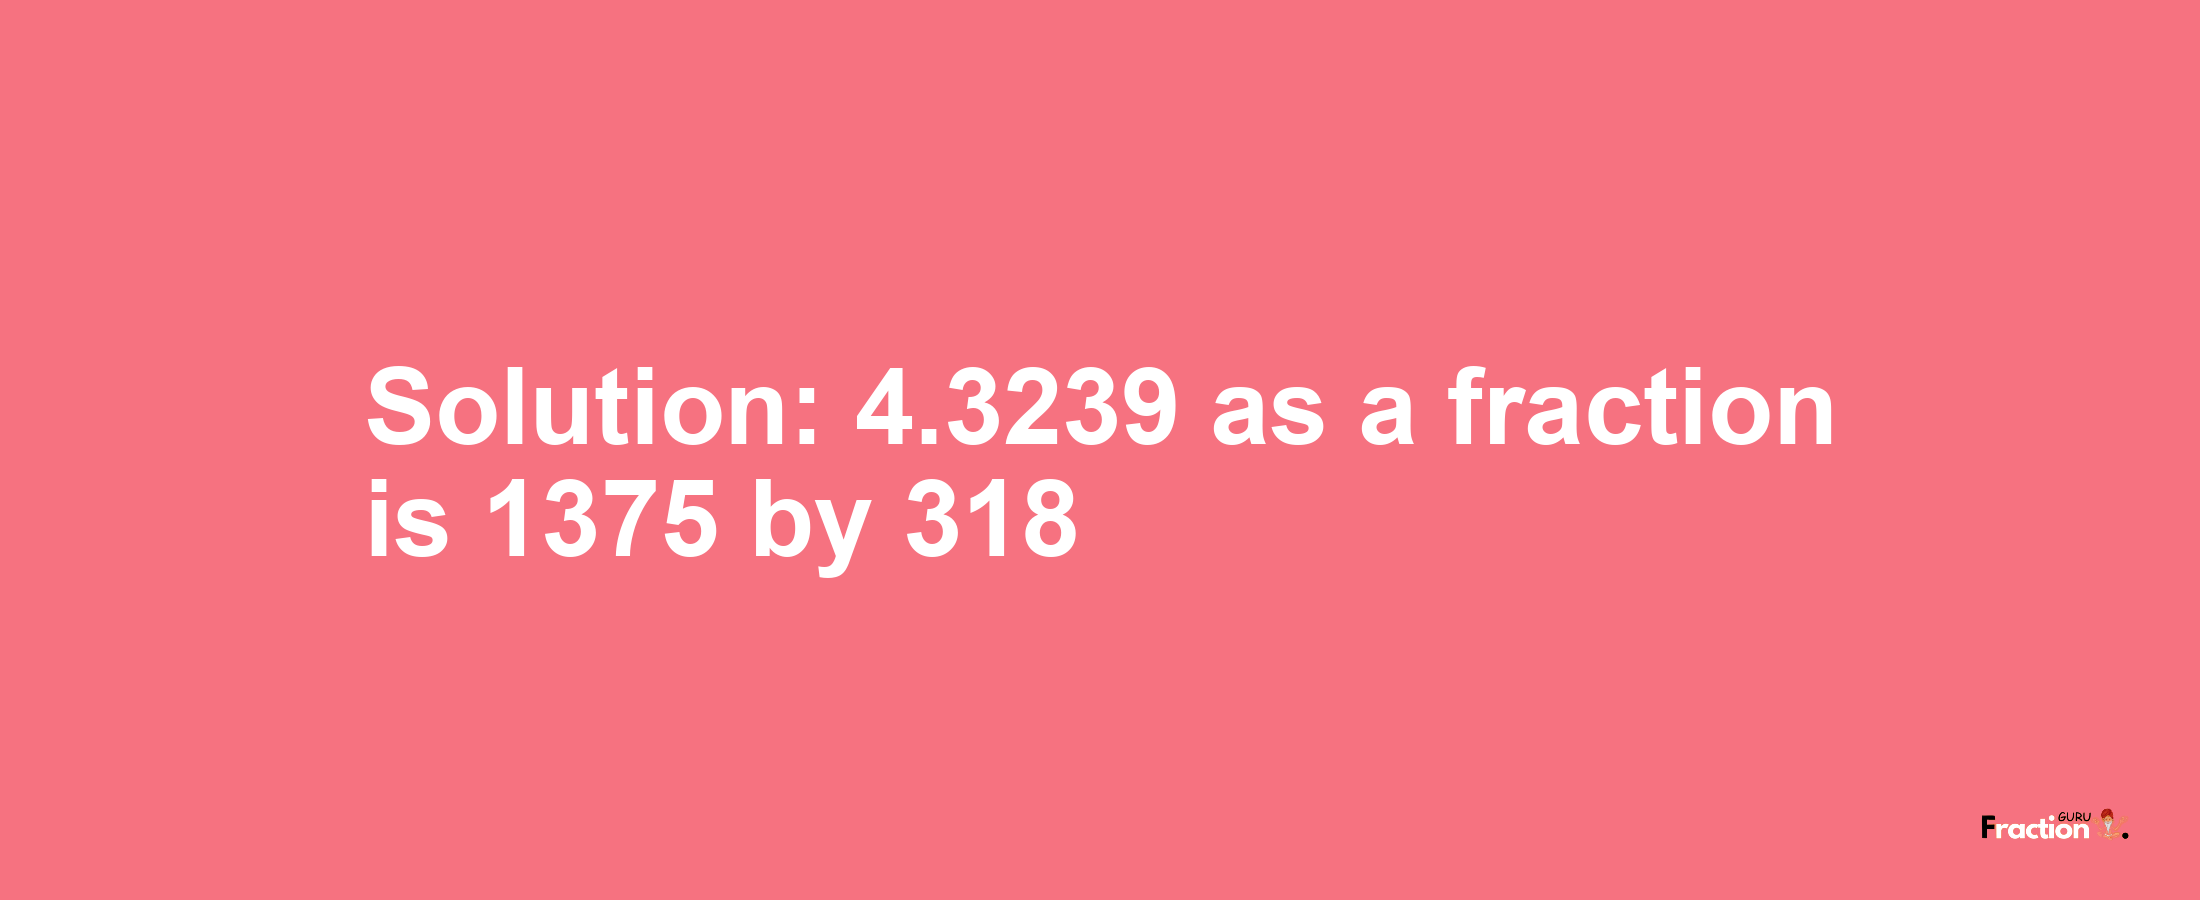 Solution:4.3239 as a fraction is 1375/318